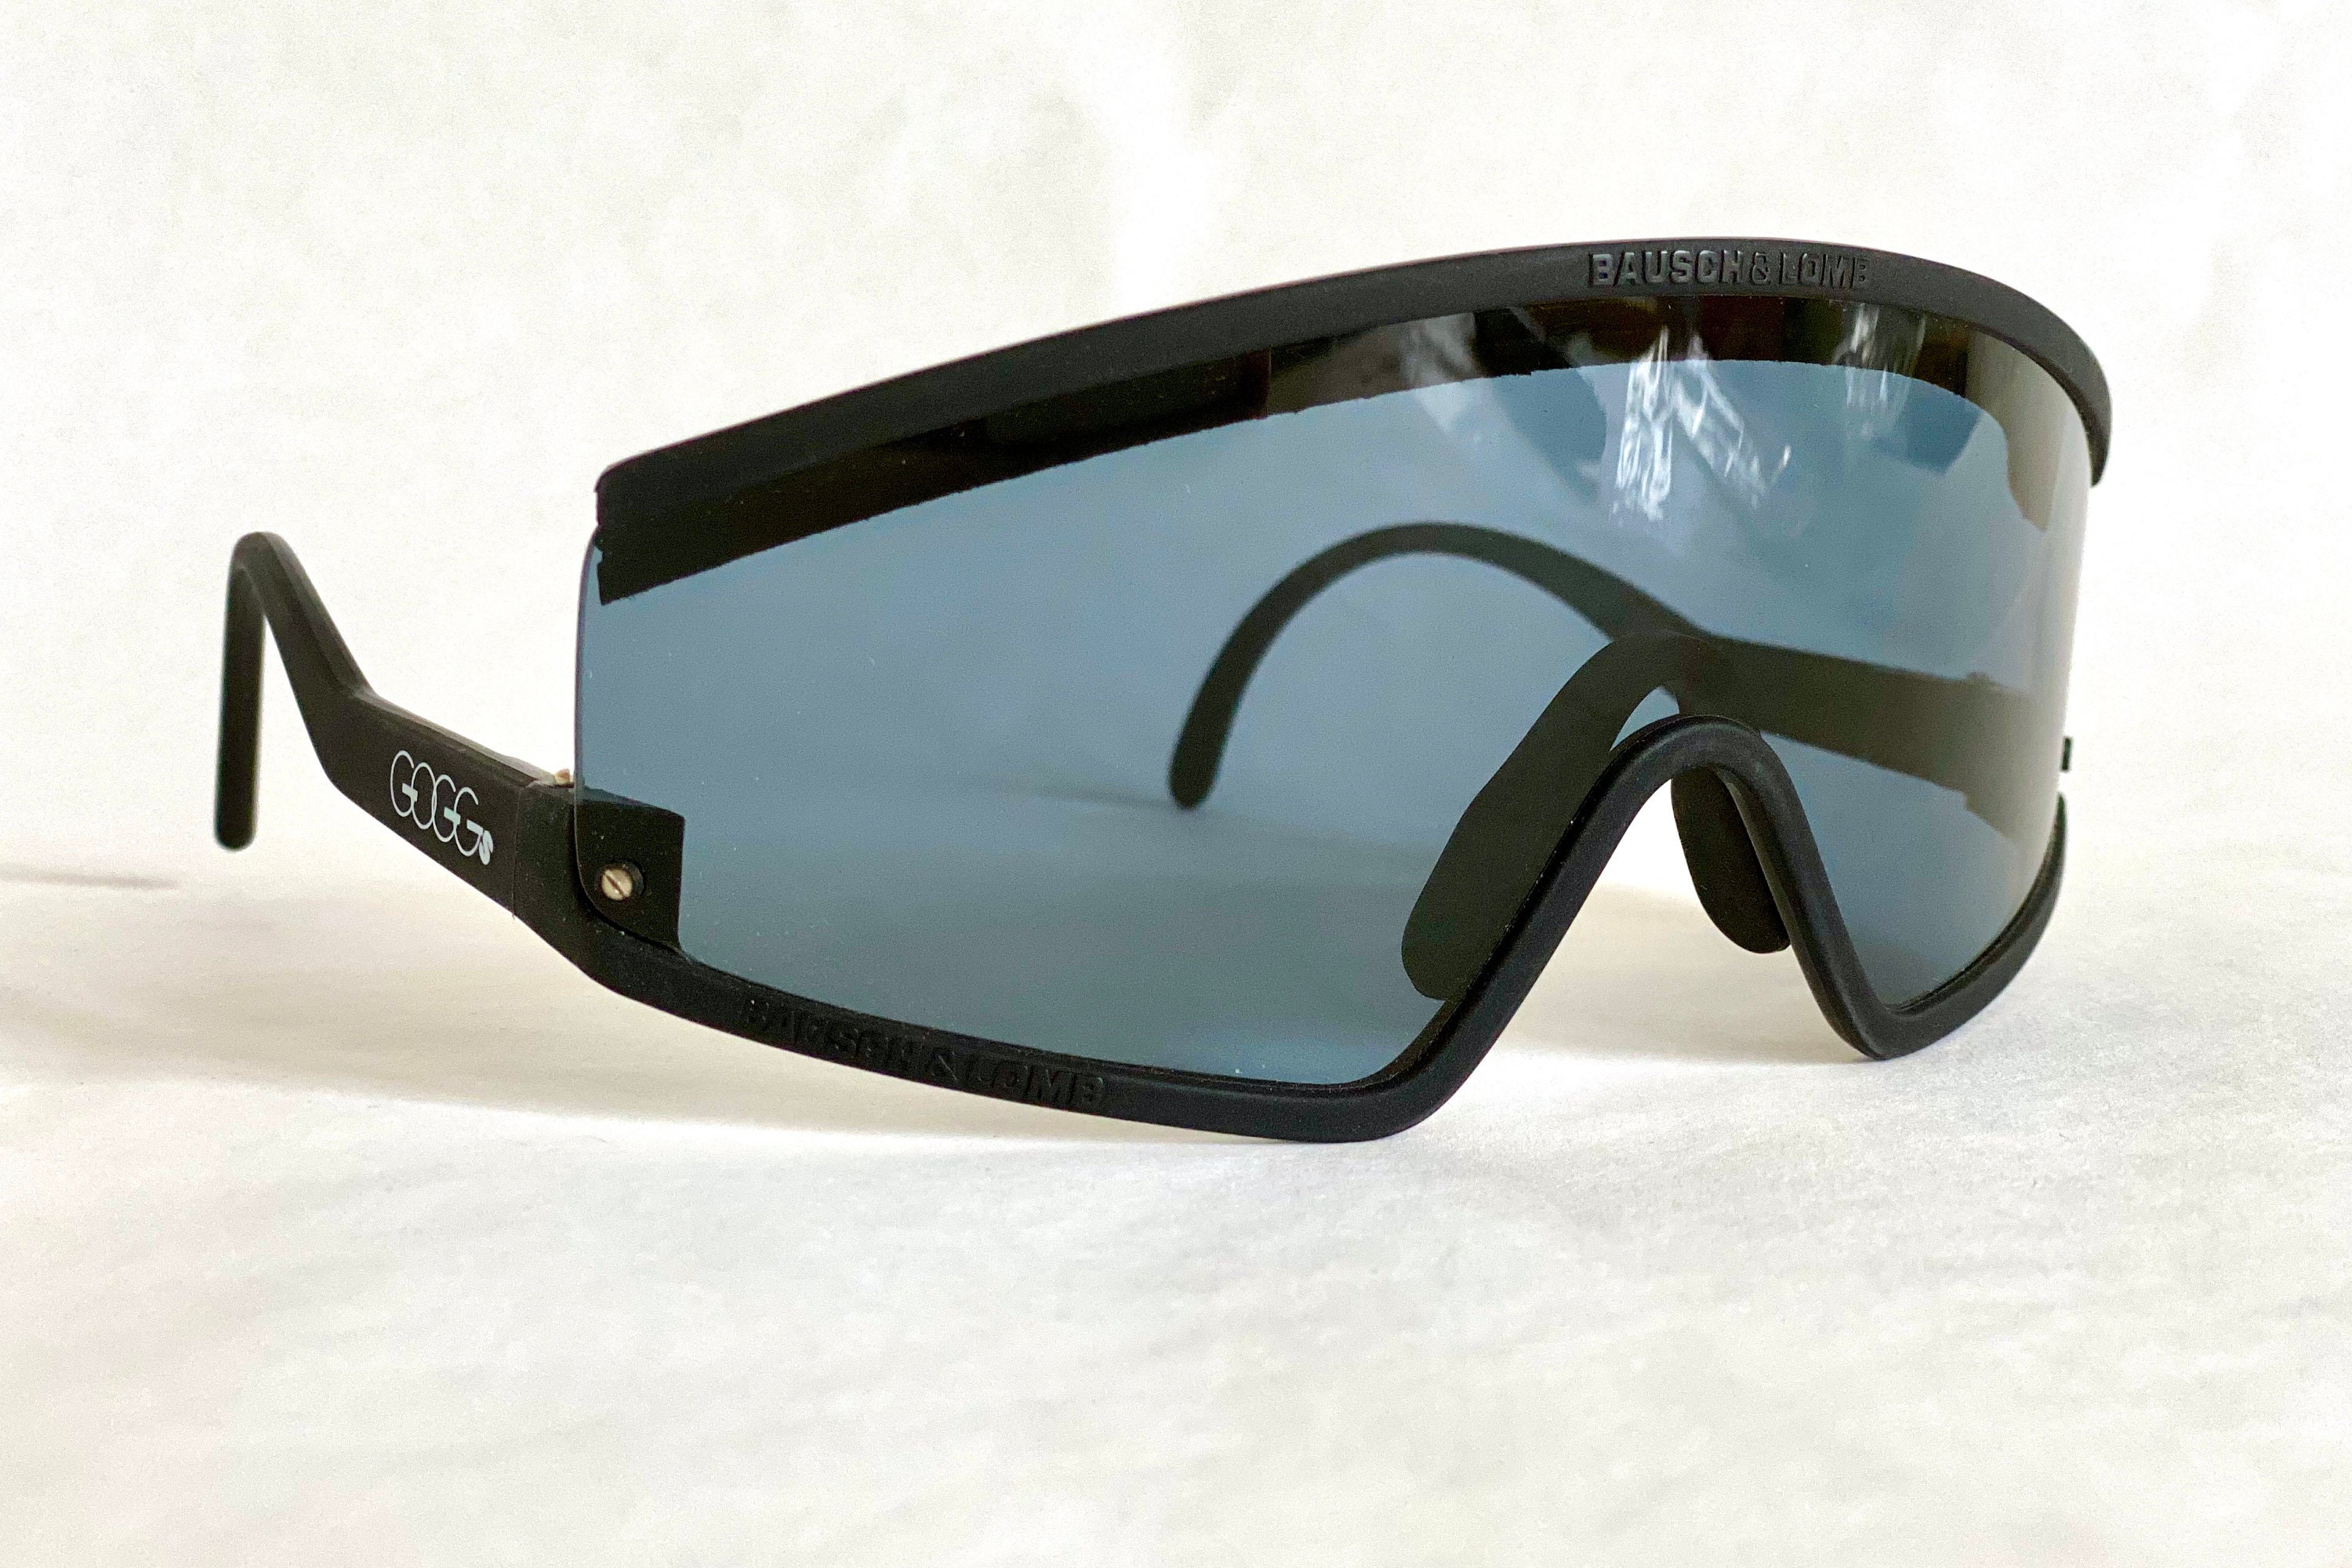 Bausch & Lomb GOGGS Vintage Sunglasses – Full Set – New Old Stock